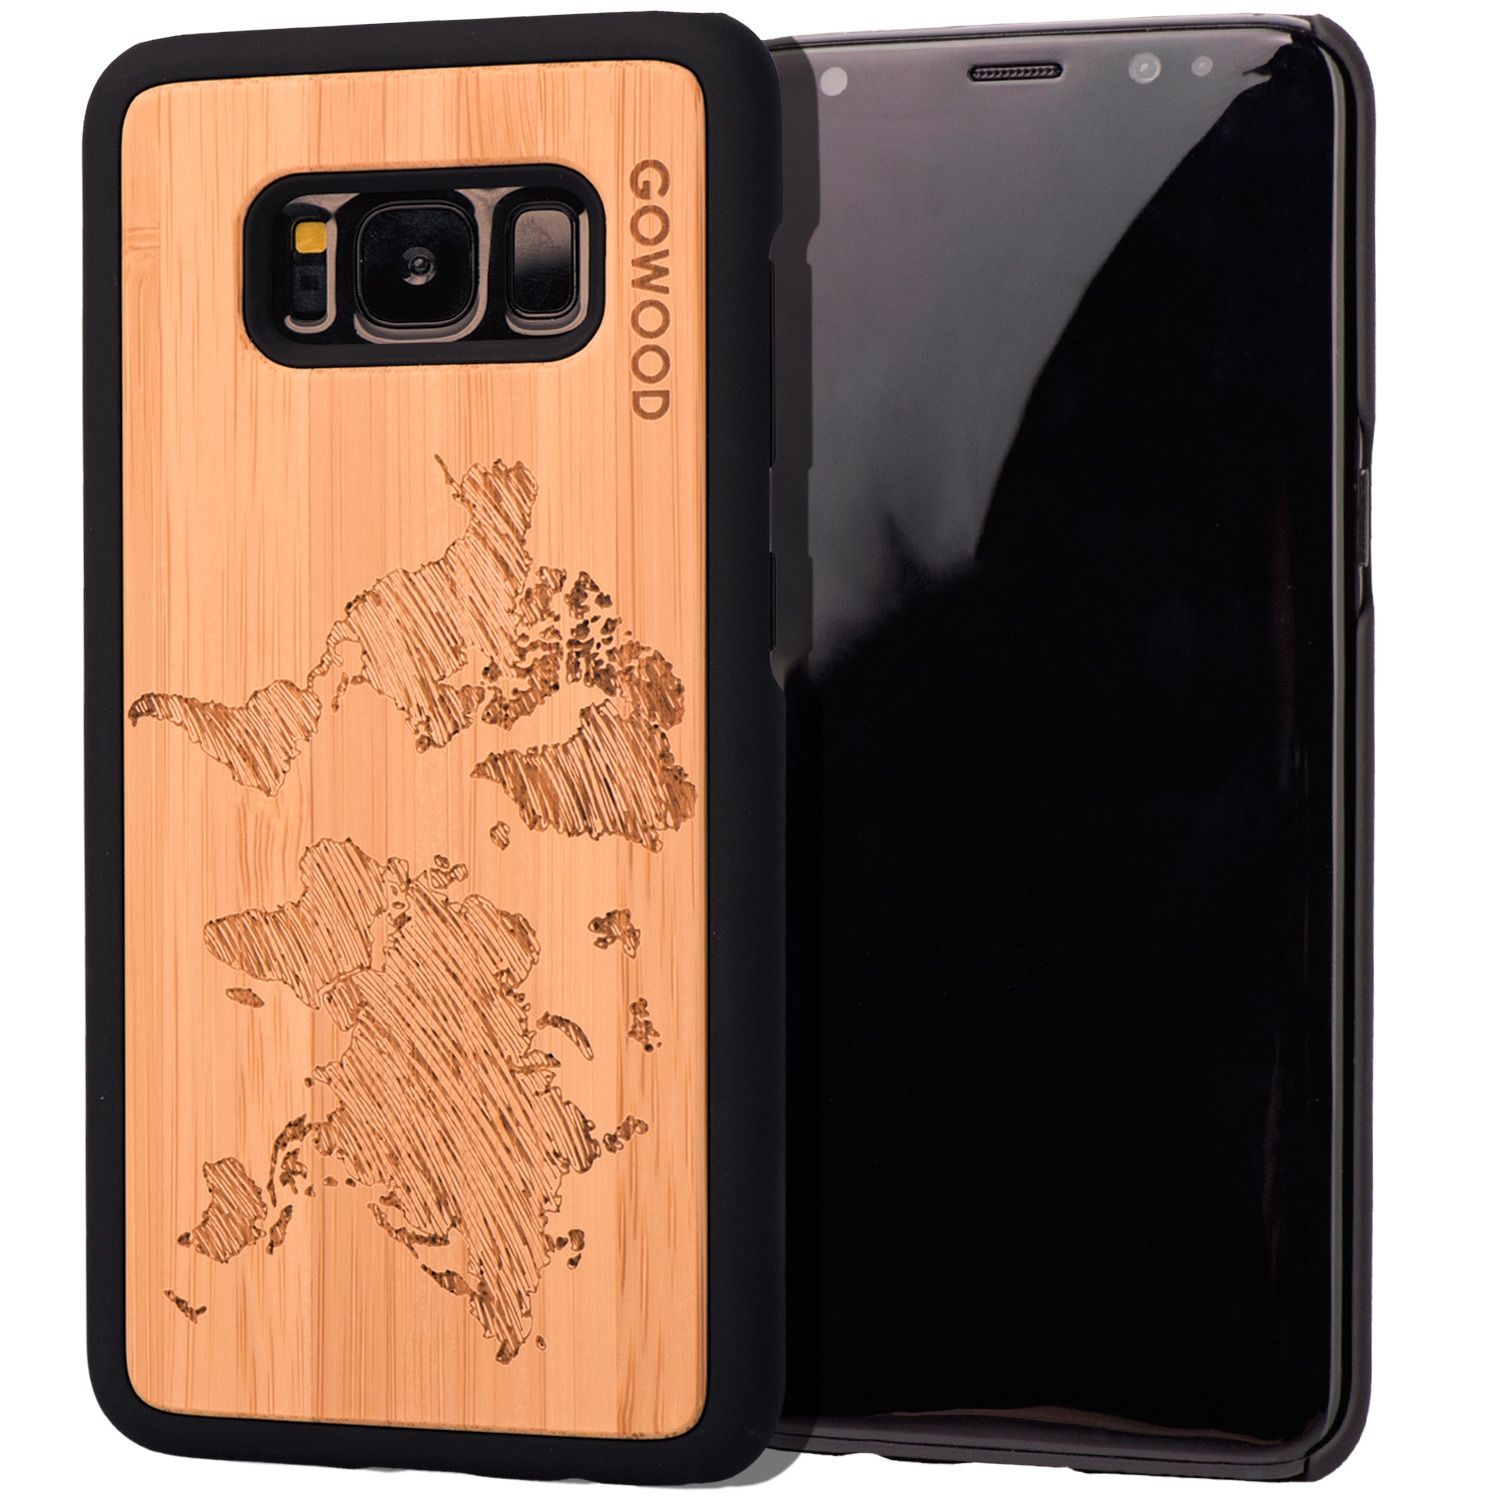 Samsung Galaxy S8 Wood Case | Bamboo World Map Design Engraved & Durable Polycarbonate Shockproof Bumper with Rubber Coating